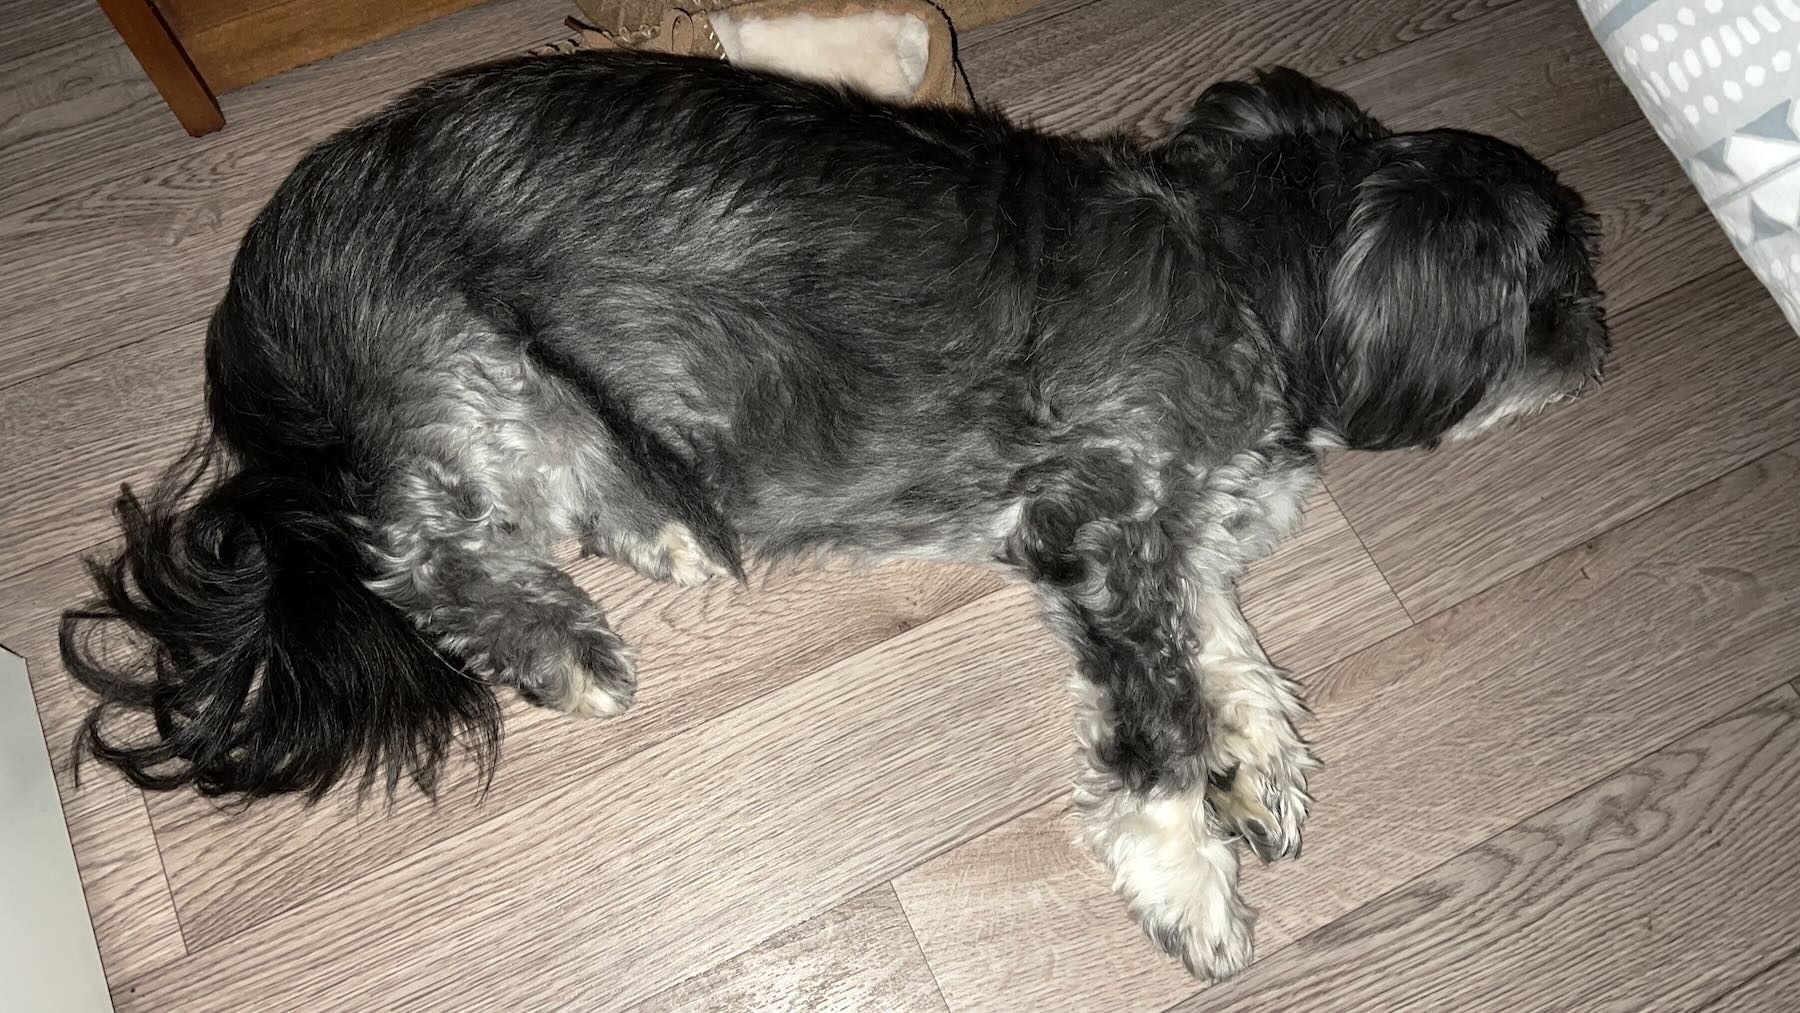 Elderly black dog, fast asleep by the bed.